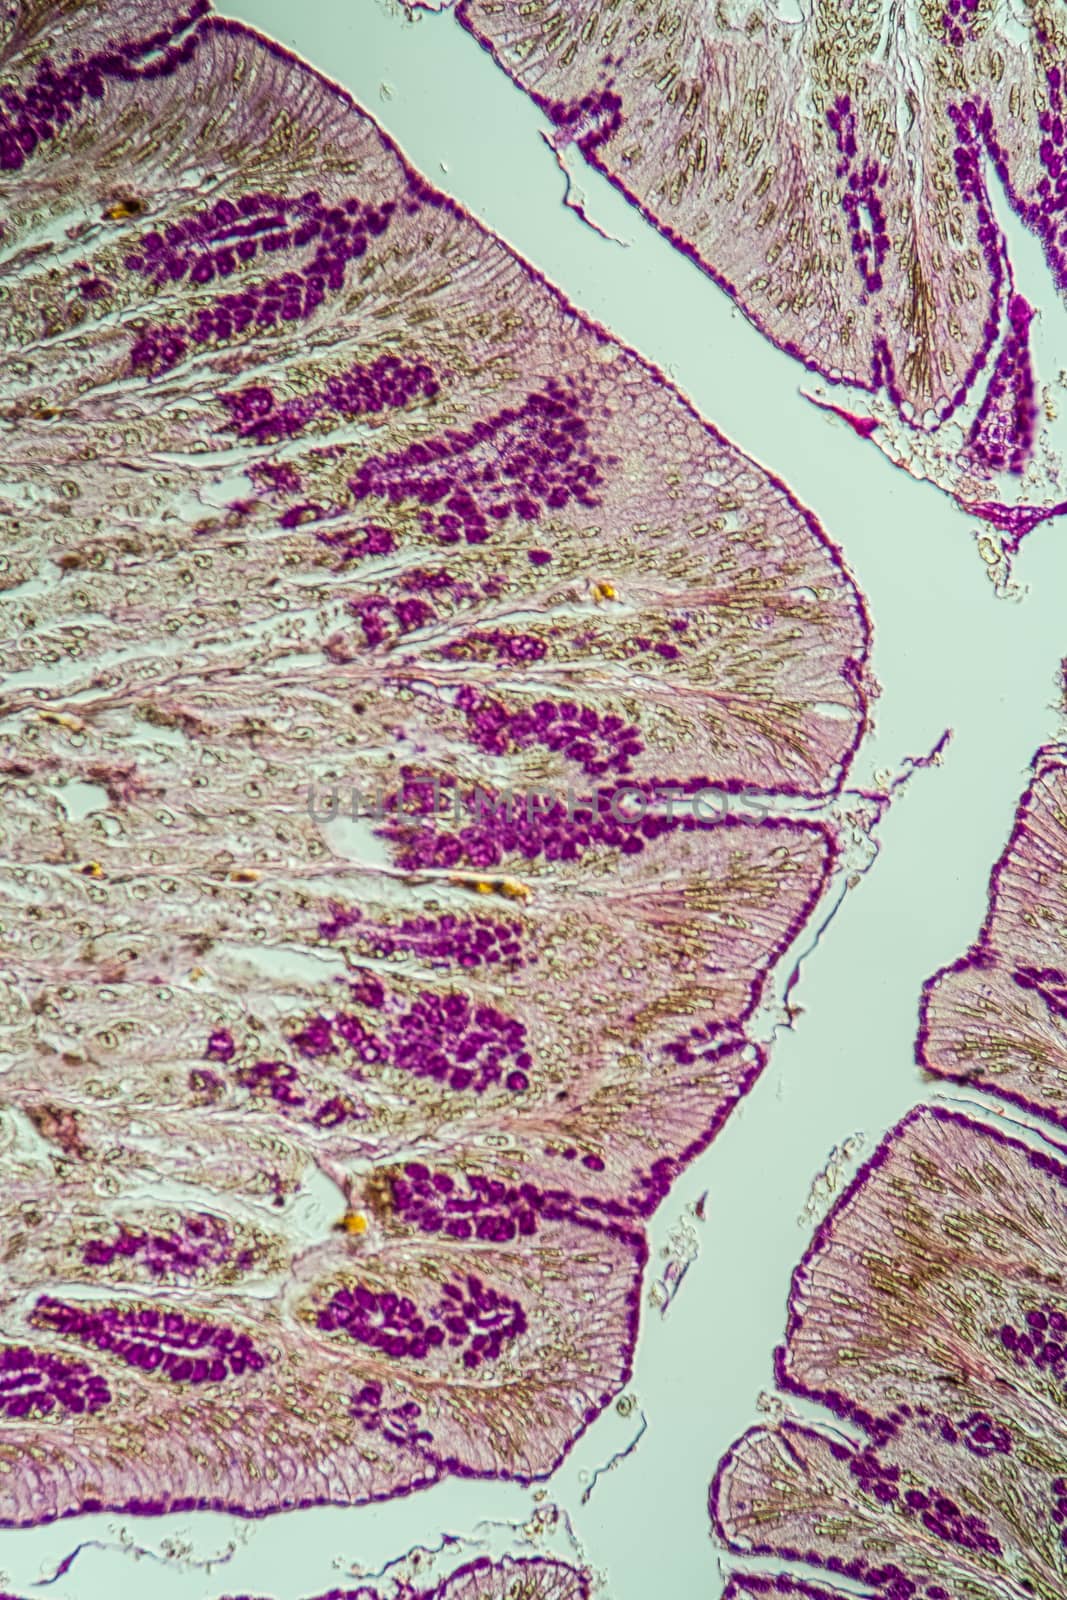 Cross-section through the intestine with glands 200x by Dr-Lange